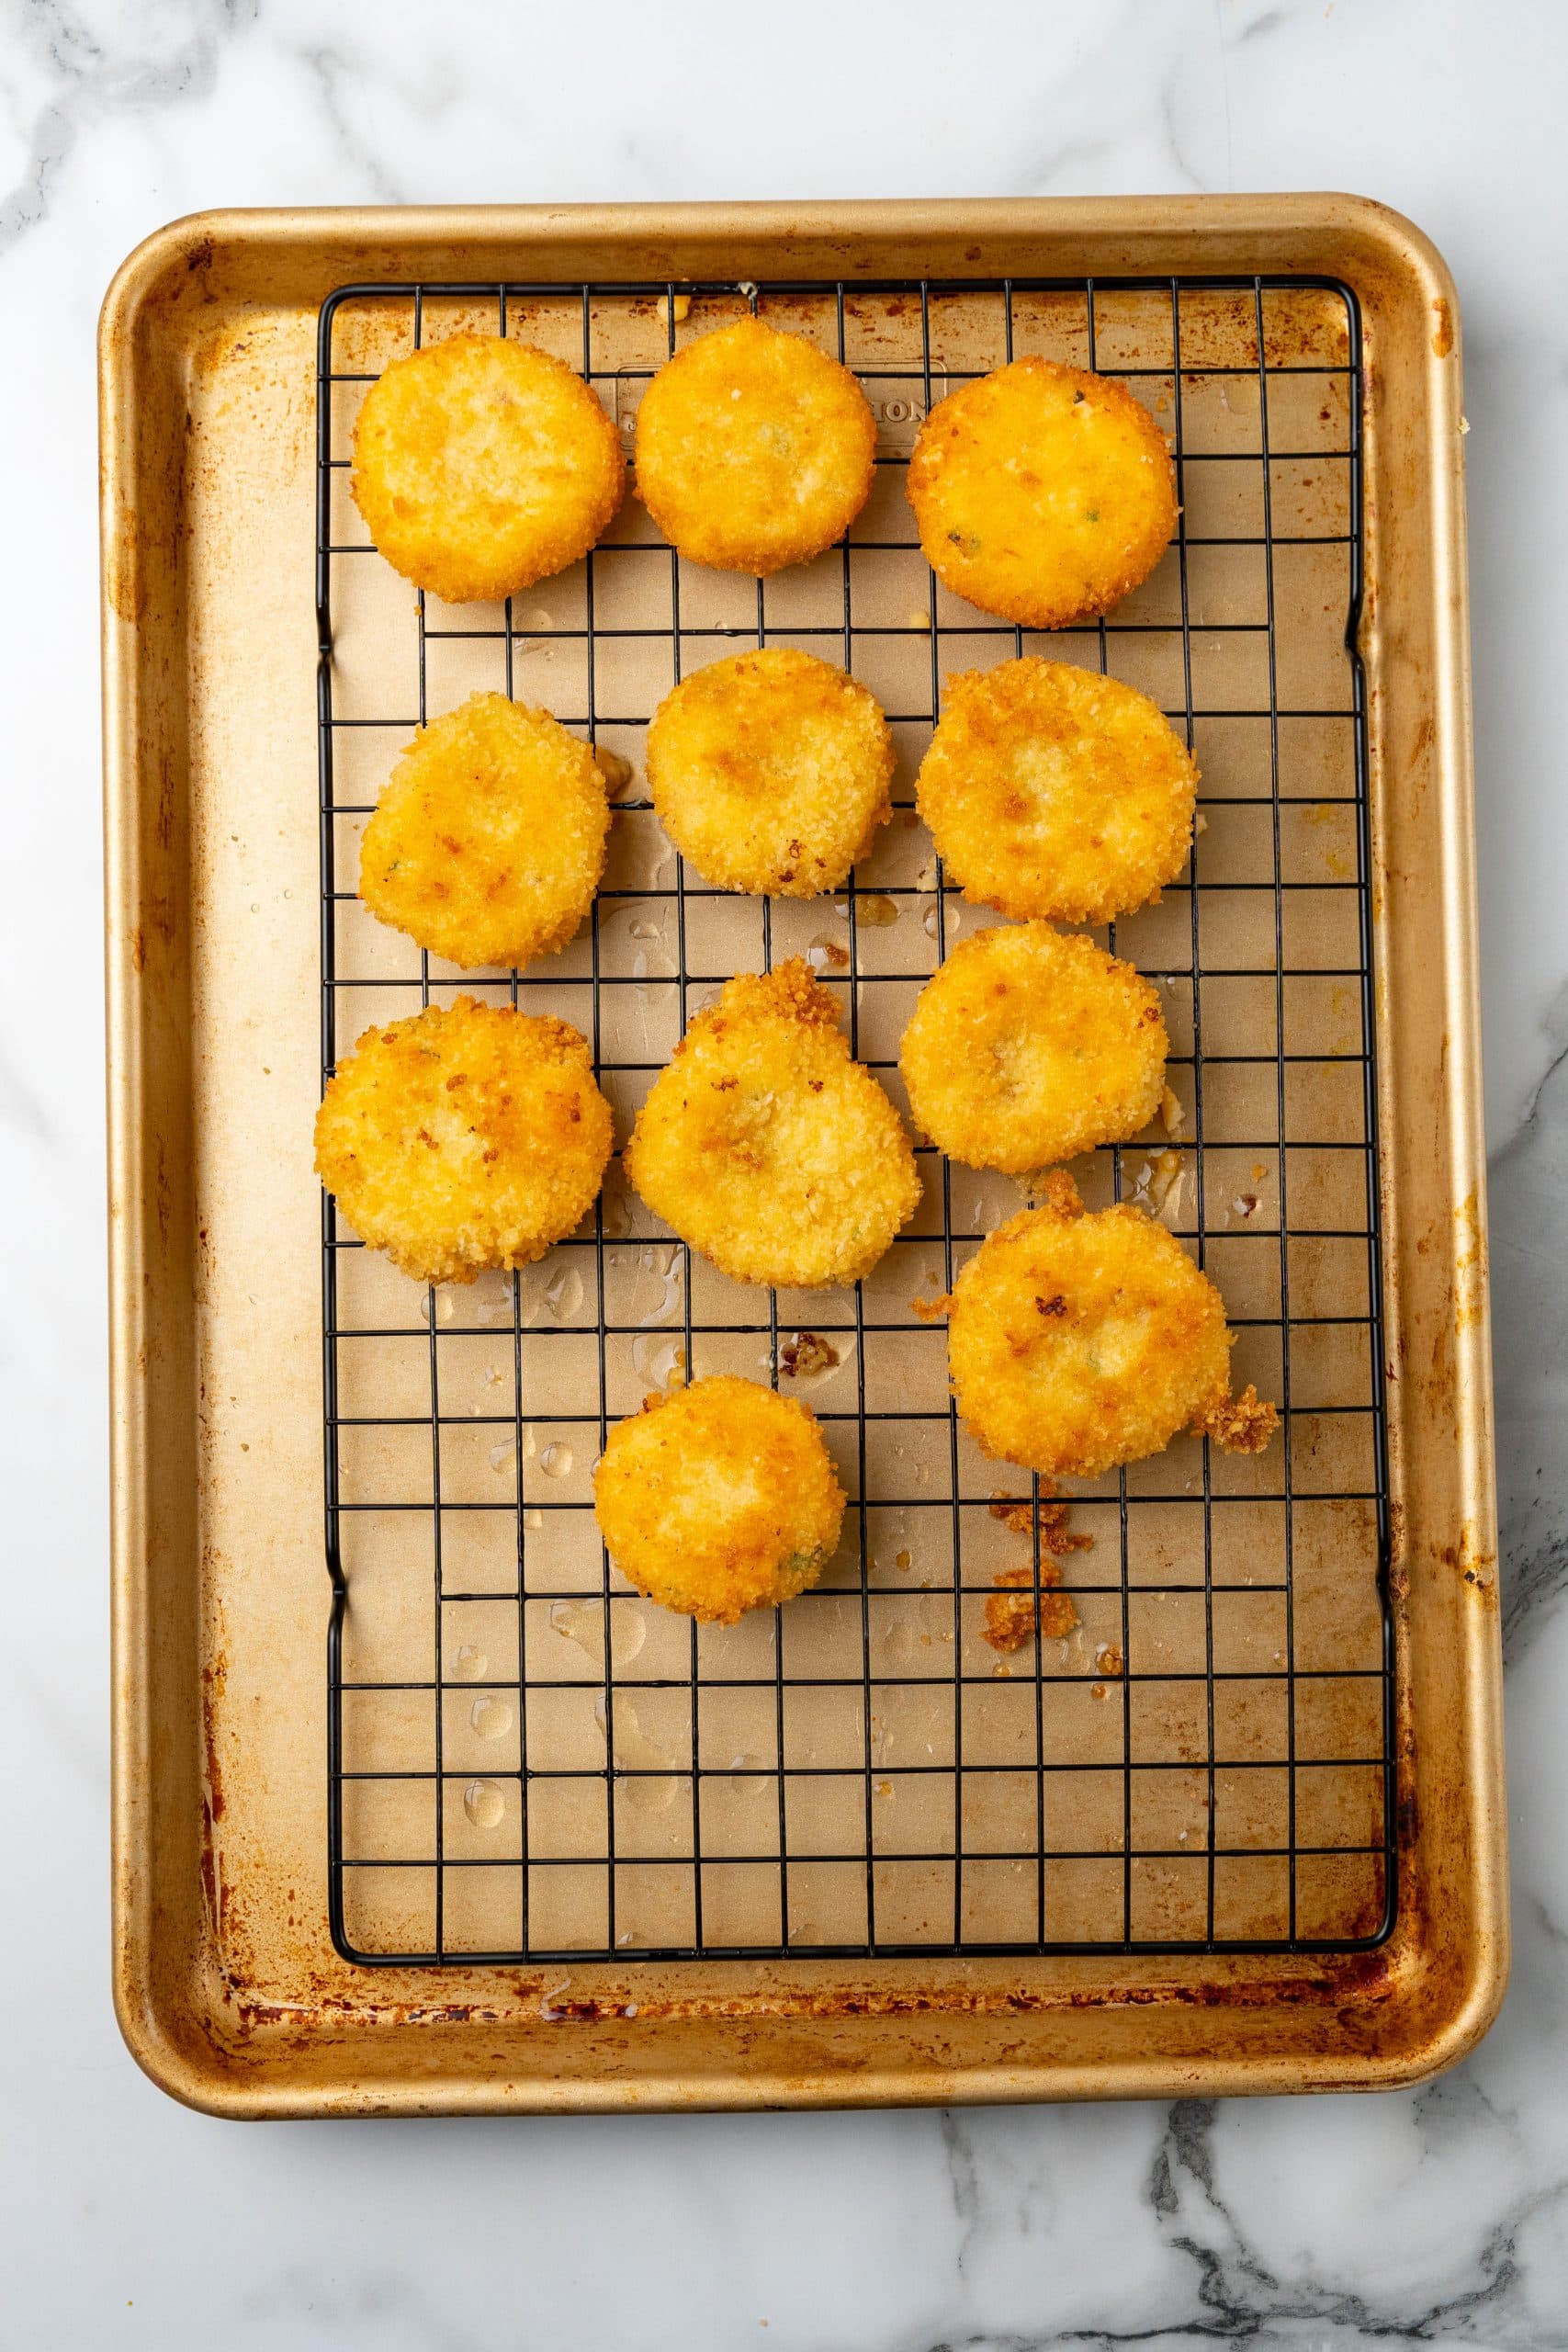 fried grits fritters draining on a wire rack over a metal sheet pan